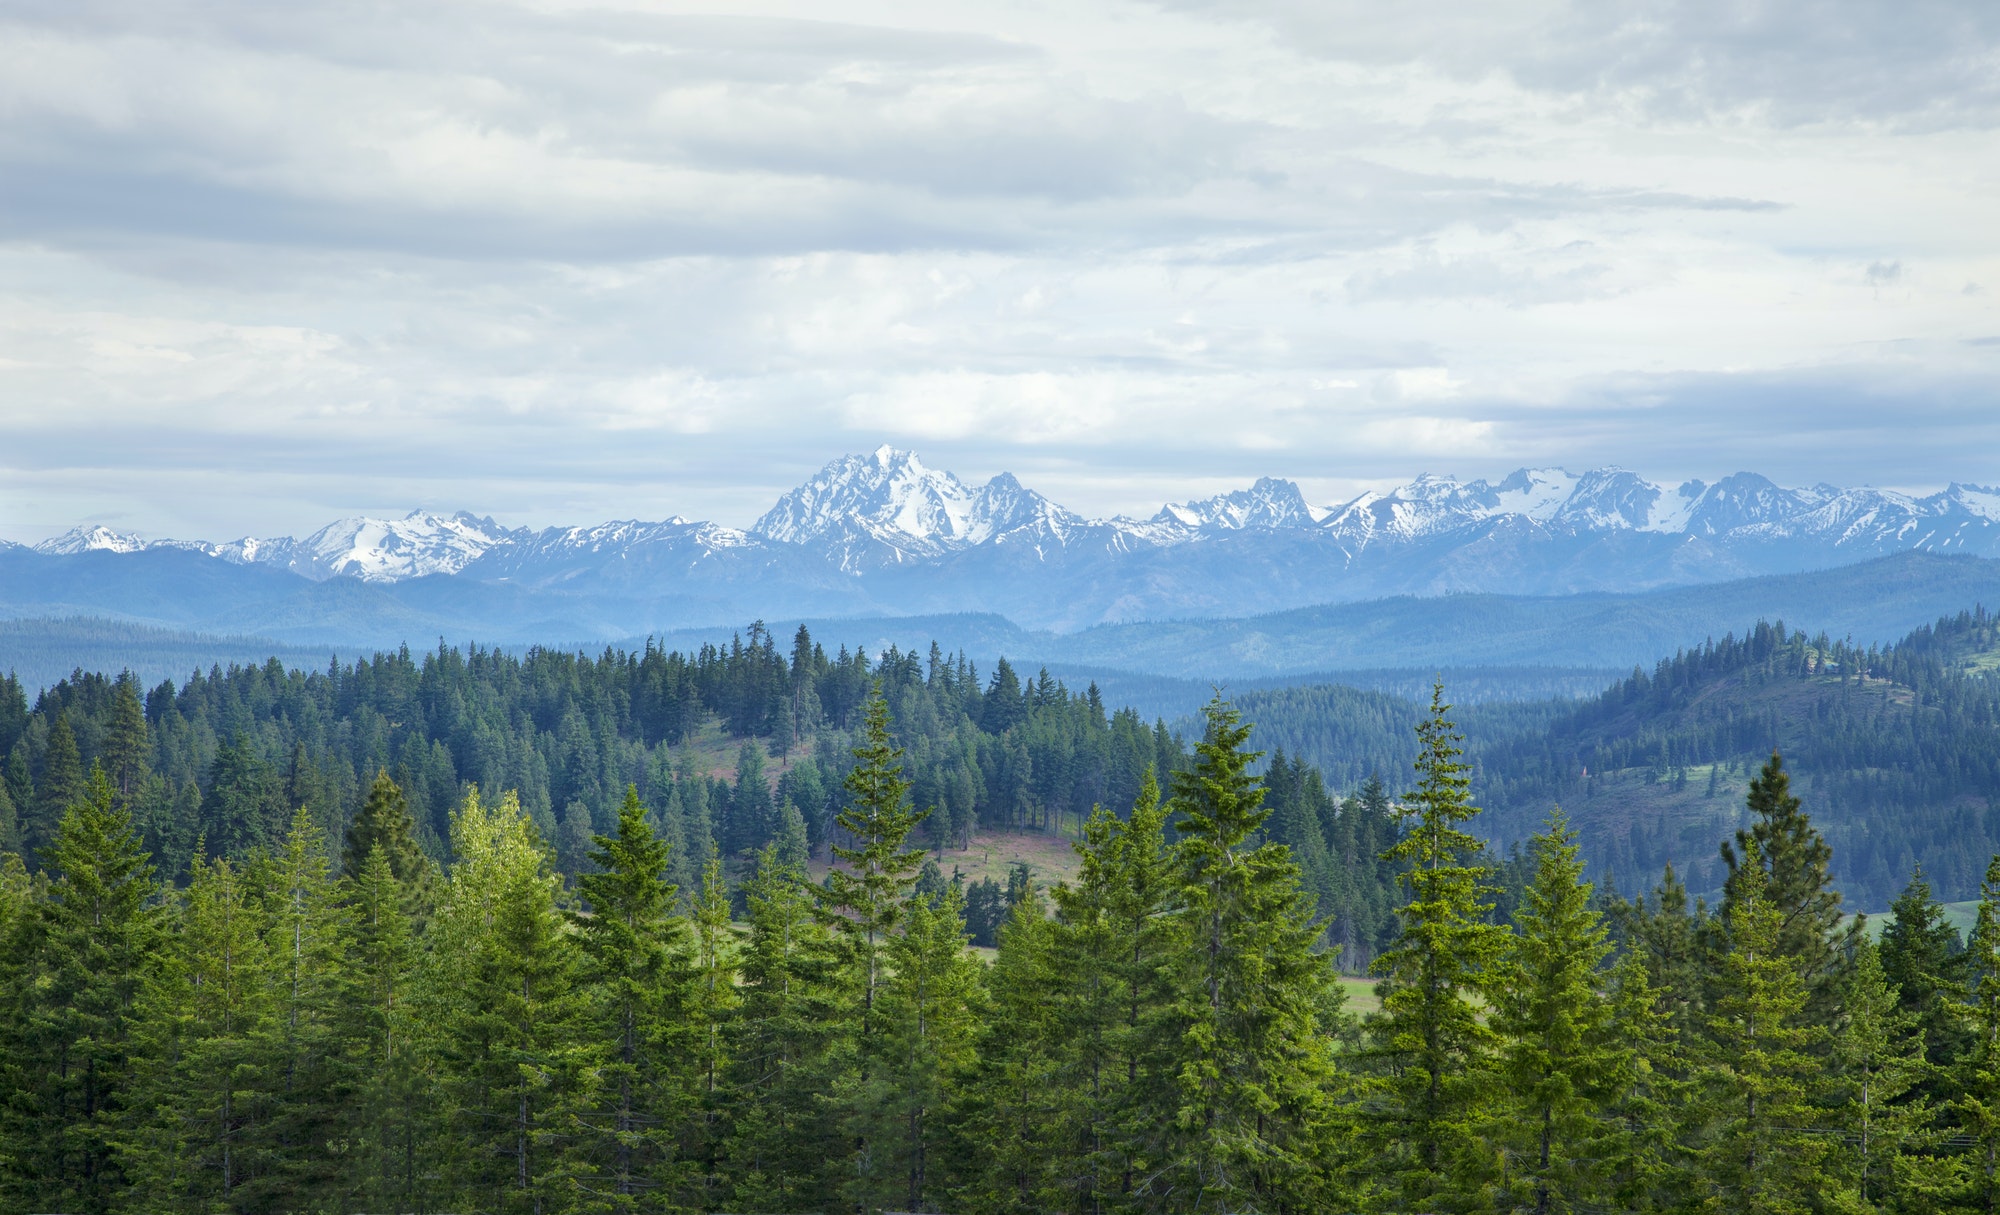 Mountains and Pines in Washington State